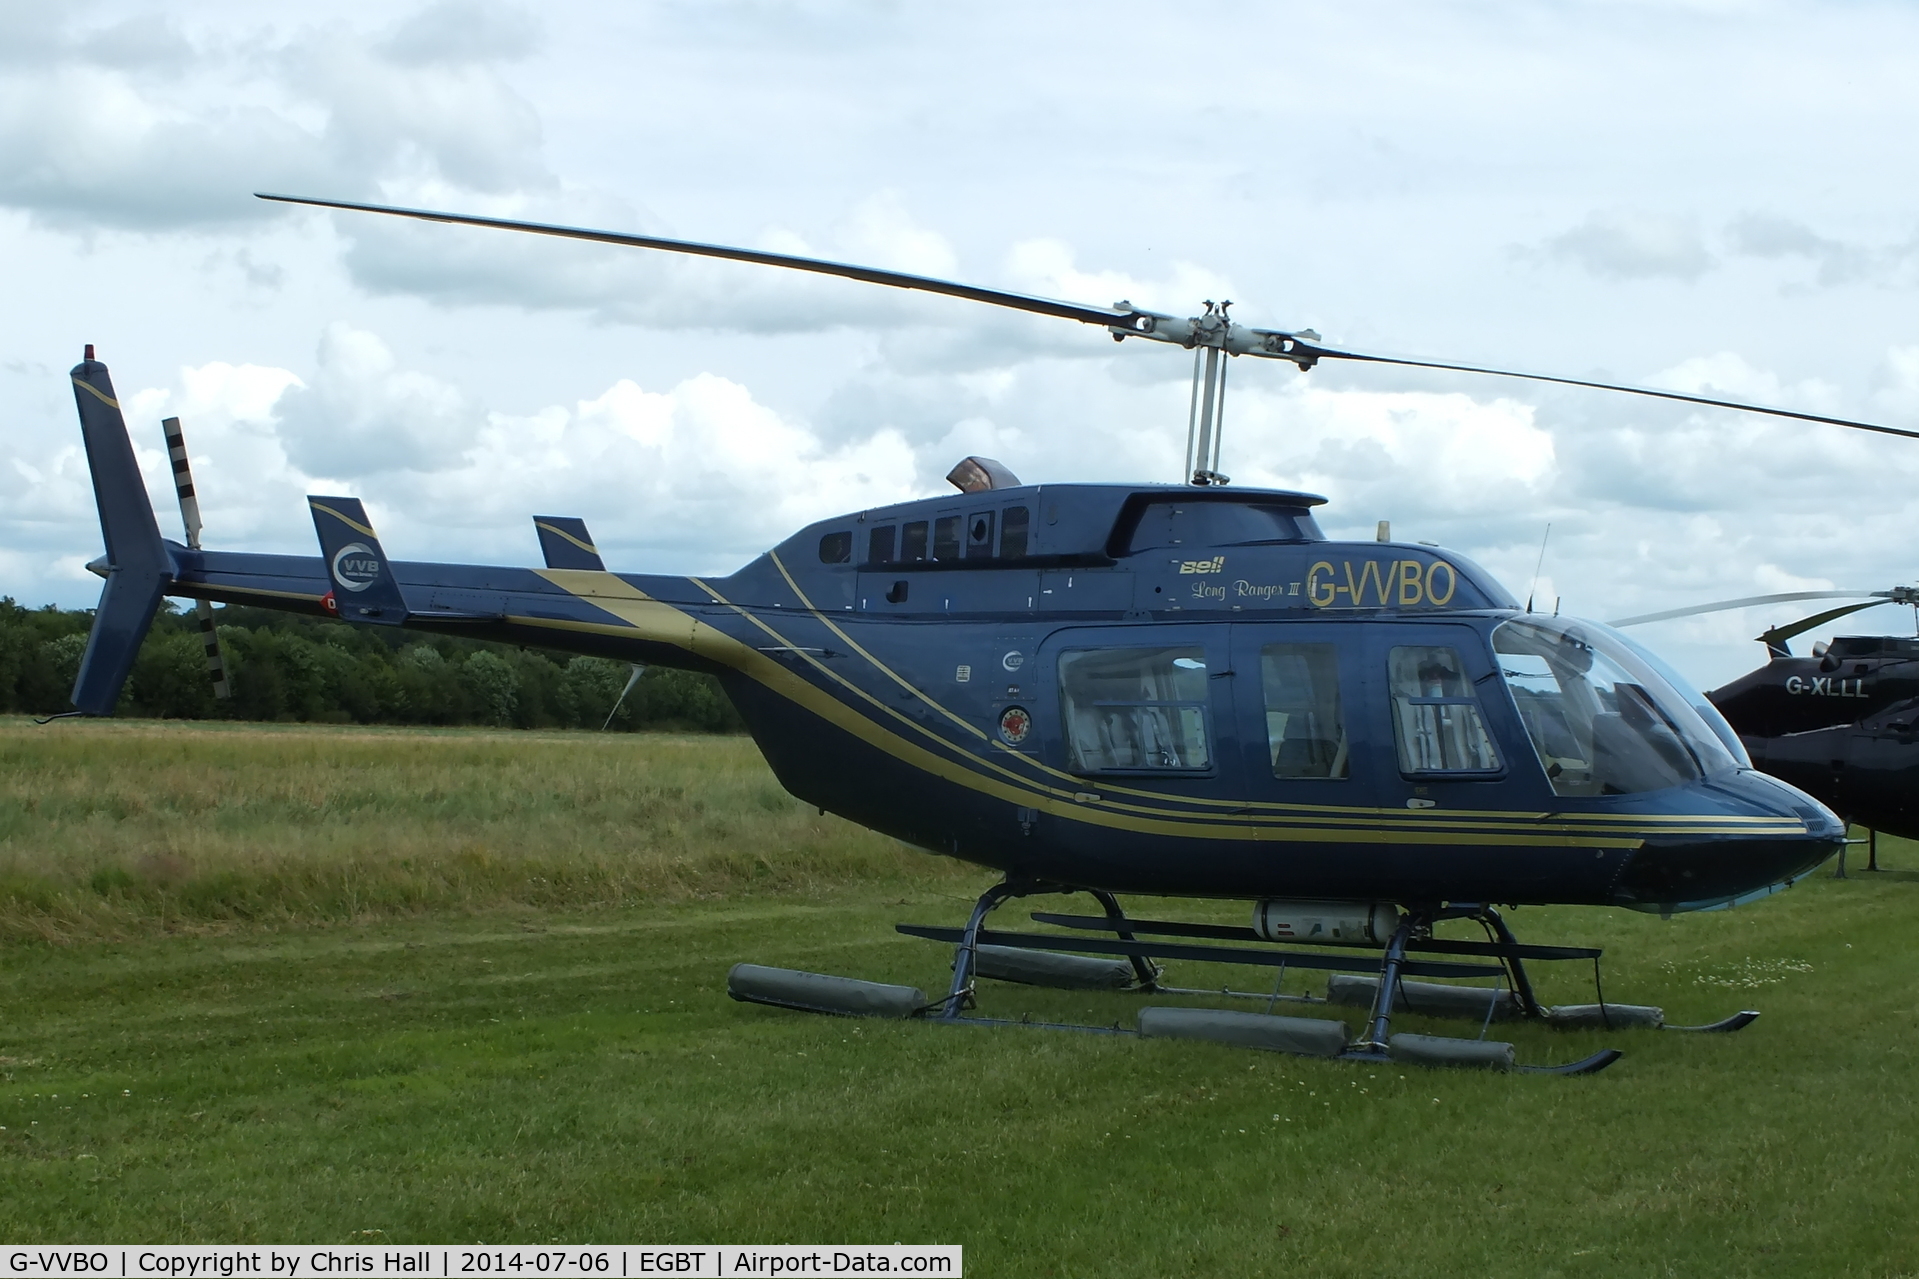 G-VVBO, 1989 Bell 206L-3 LongRanger III C/N 51284, ferrying race fans to the British F1 Grand Prix at Silverstone